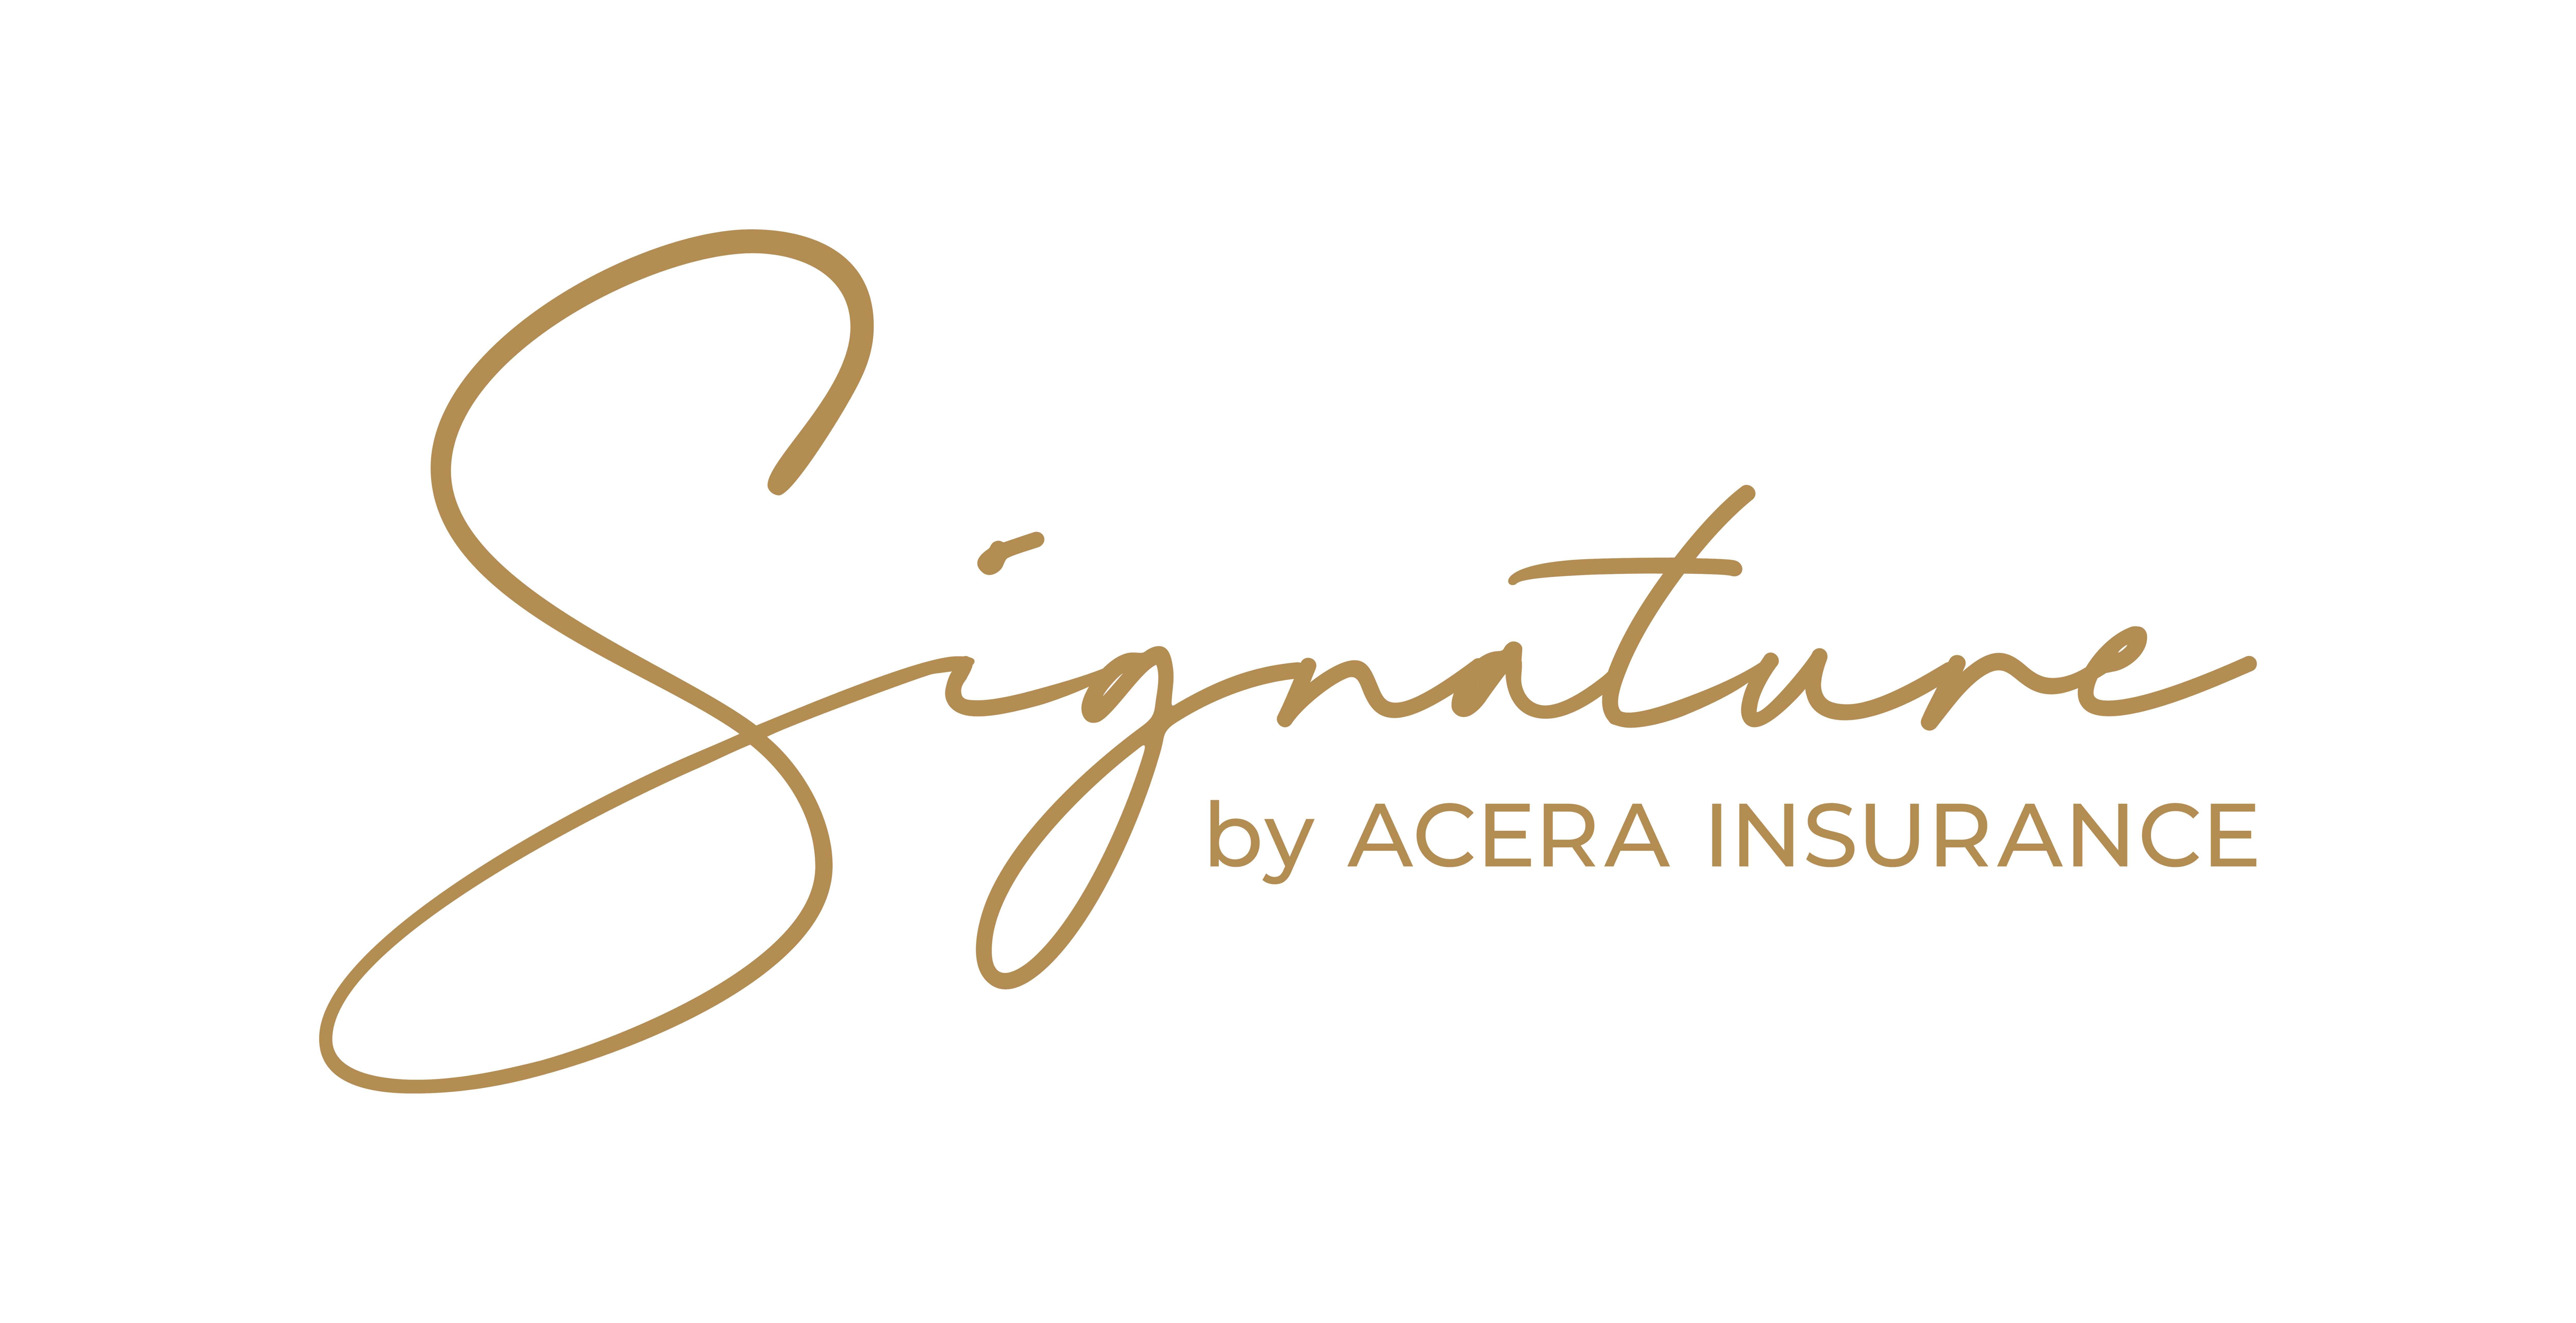 Signature by Acera Insurance